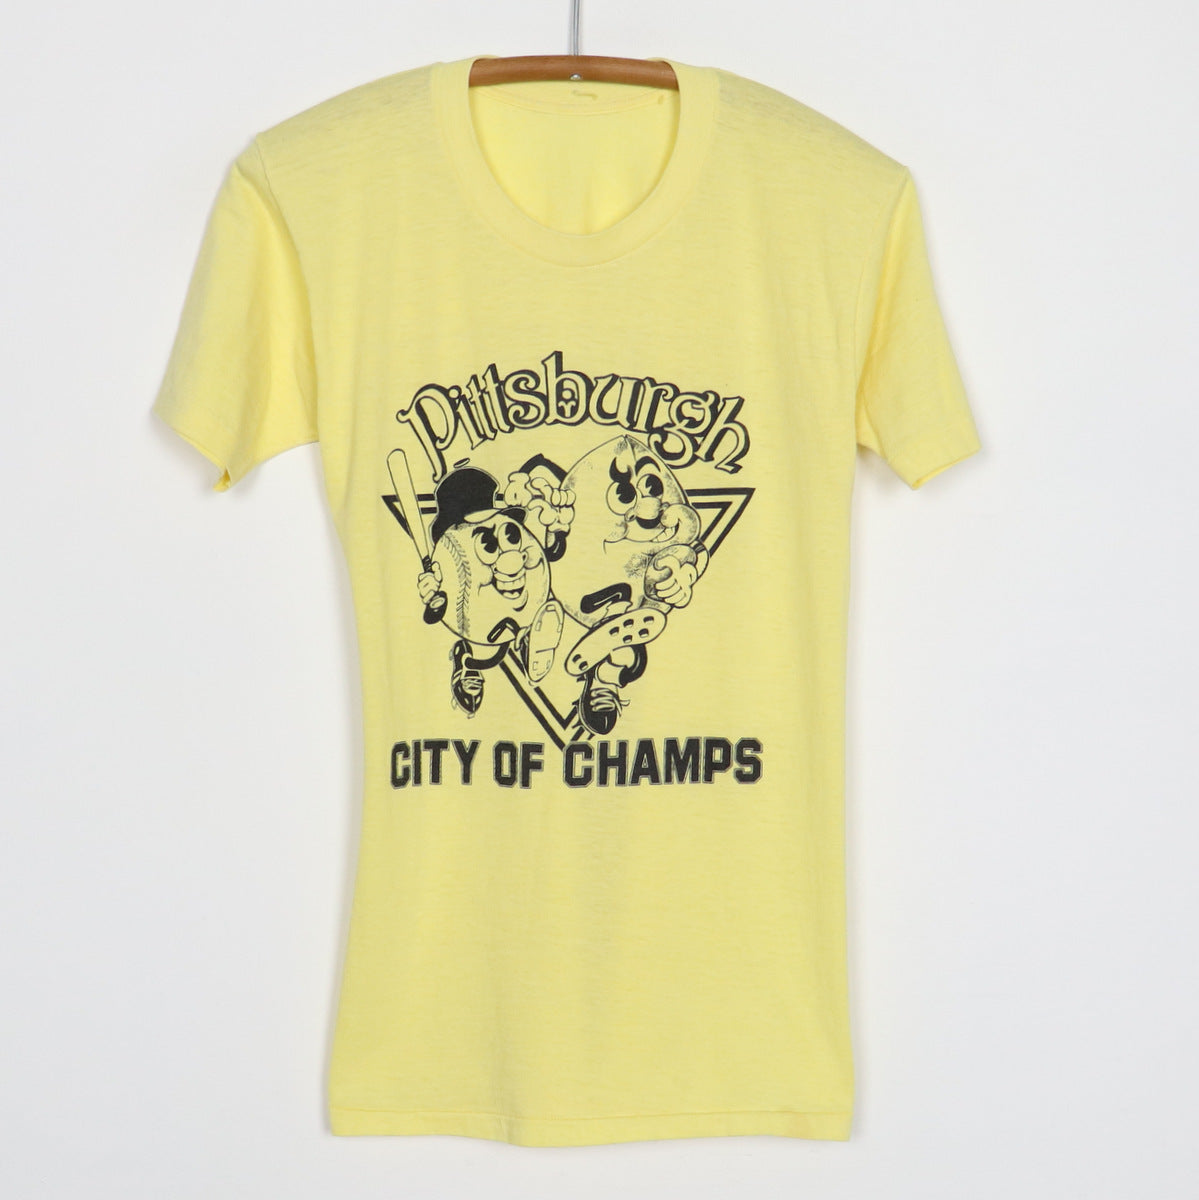 Wyco Vintage 1980s Pittsburgh City of Champions Shirt